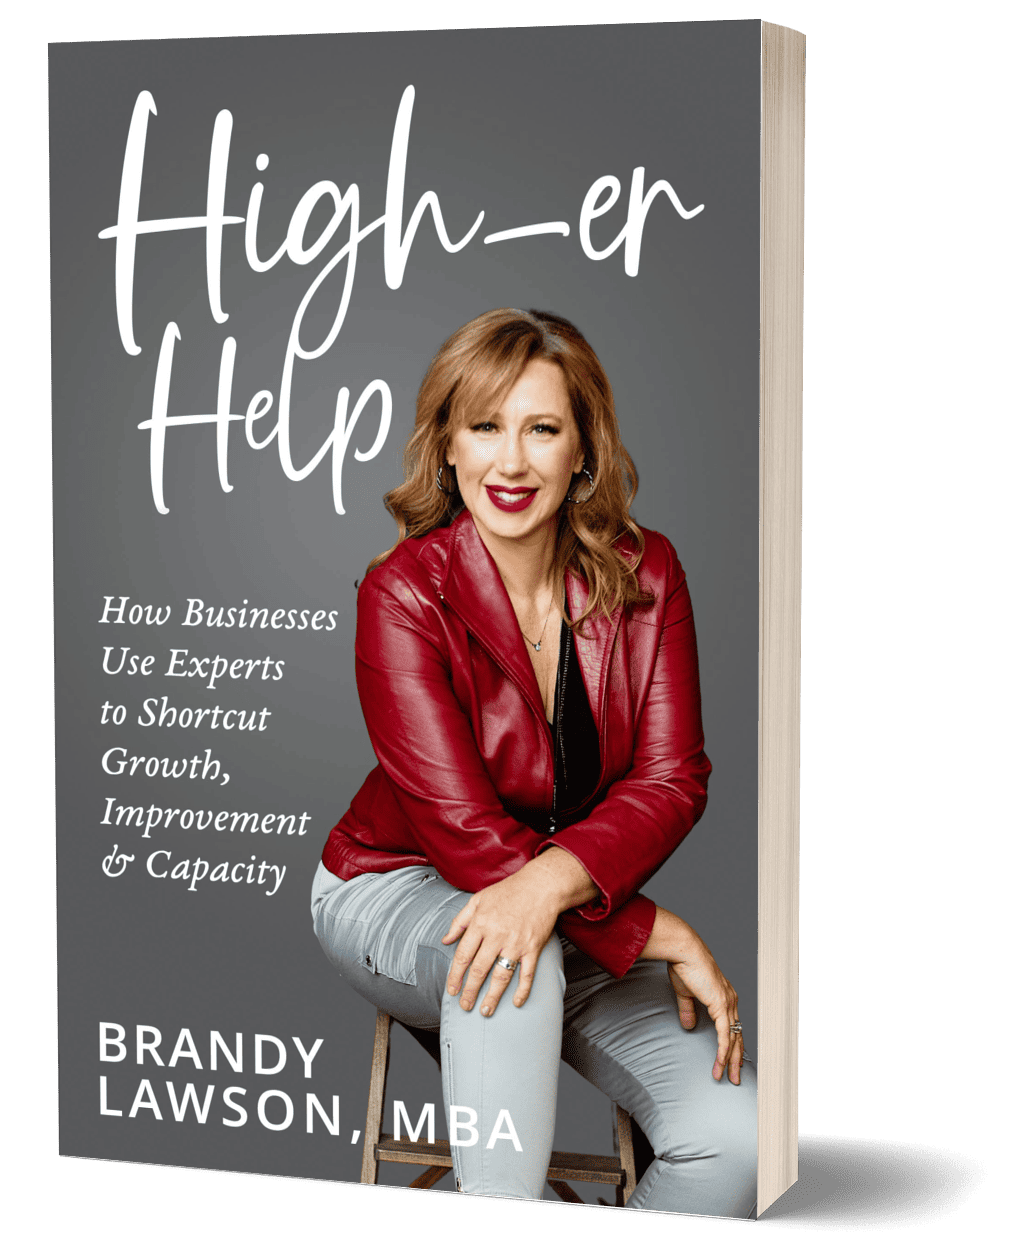 High-er Help Book: How Businesses Use Experts to Shortcut Growth, Improvement & Capacity